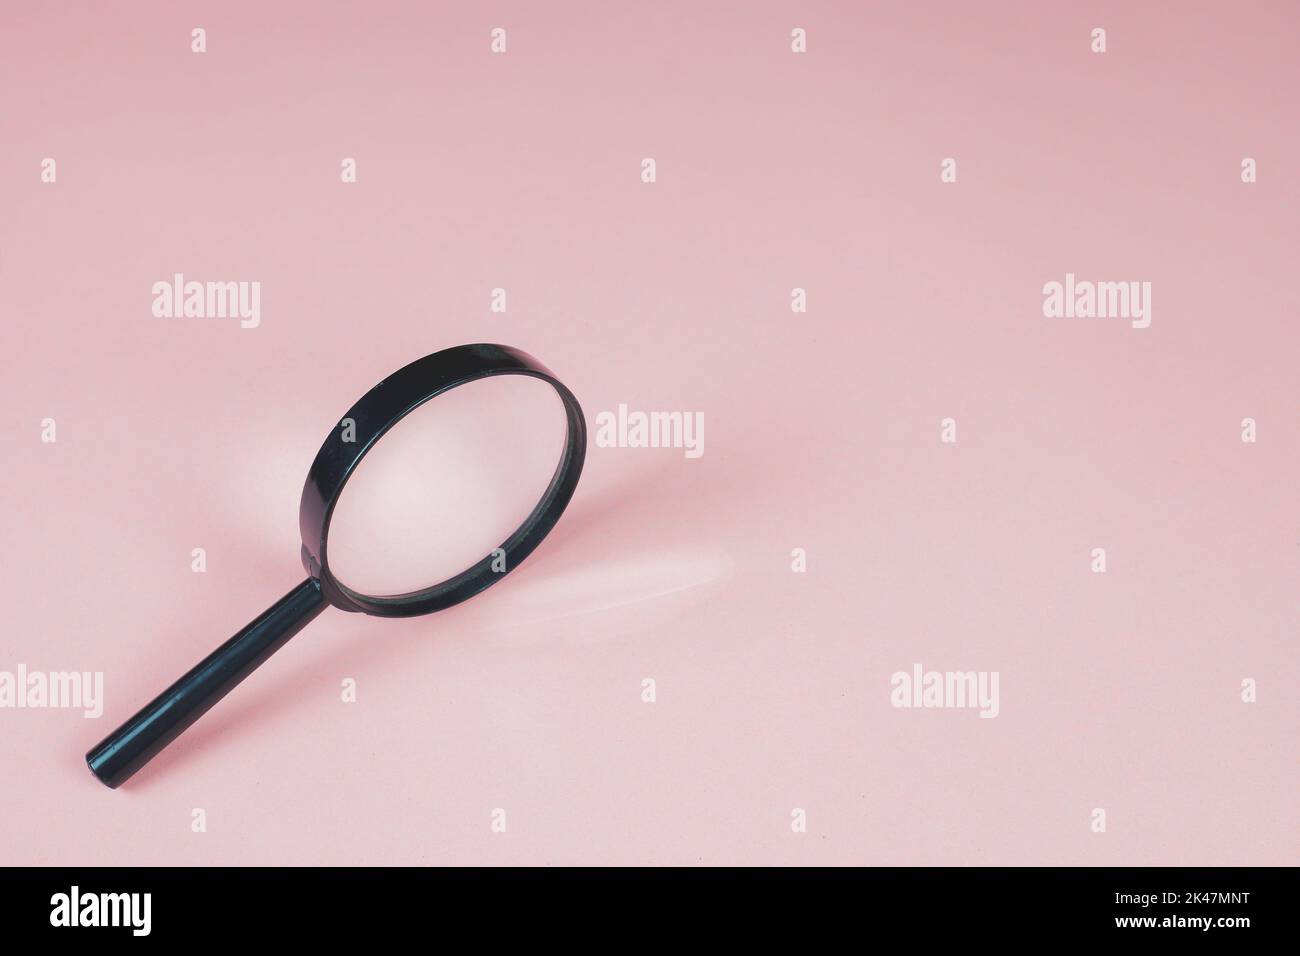 Magnifying glass on the pink background. Light is refracted through glass of magnifier. Copy space for text. Finding and zooming concept. Lens, loupe. Stock Photo